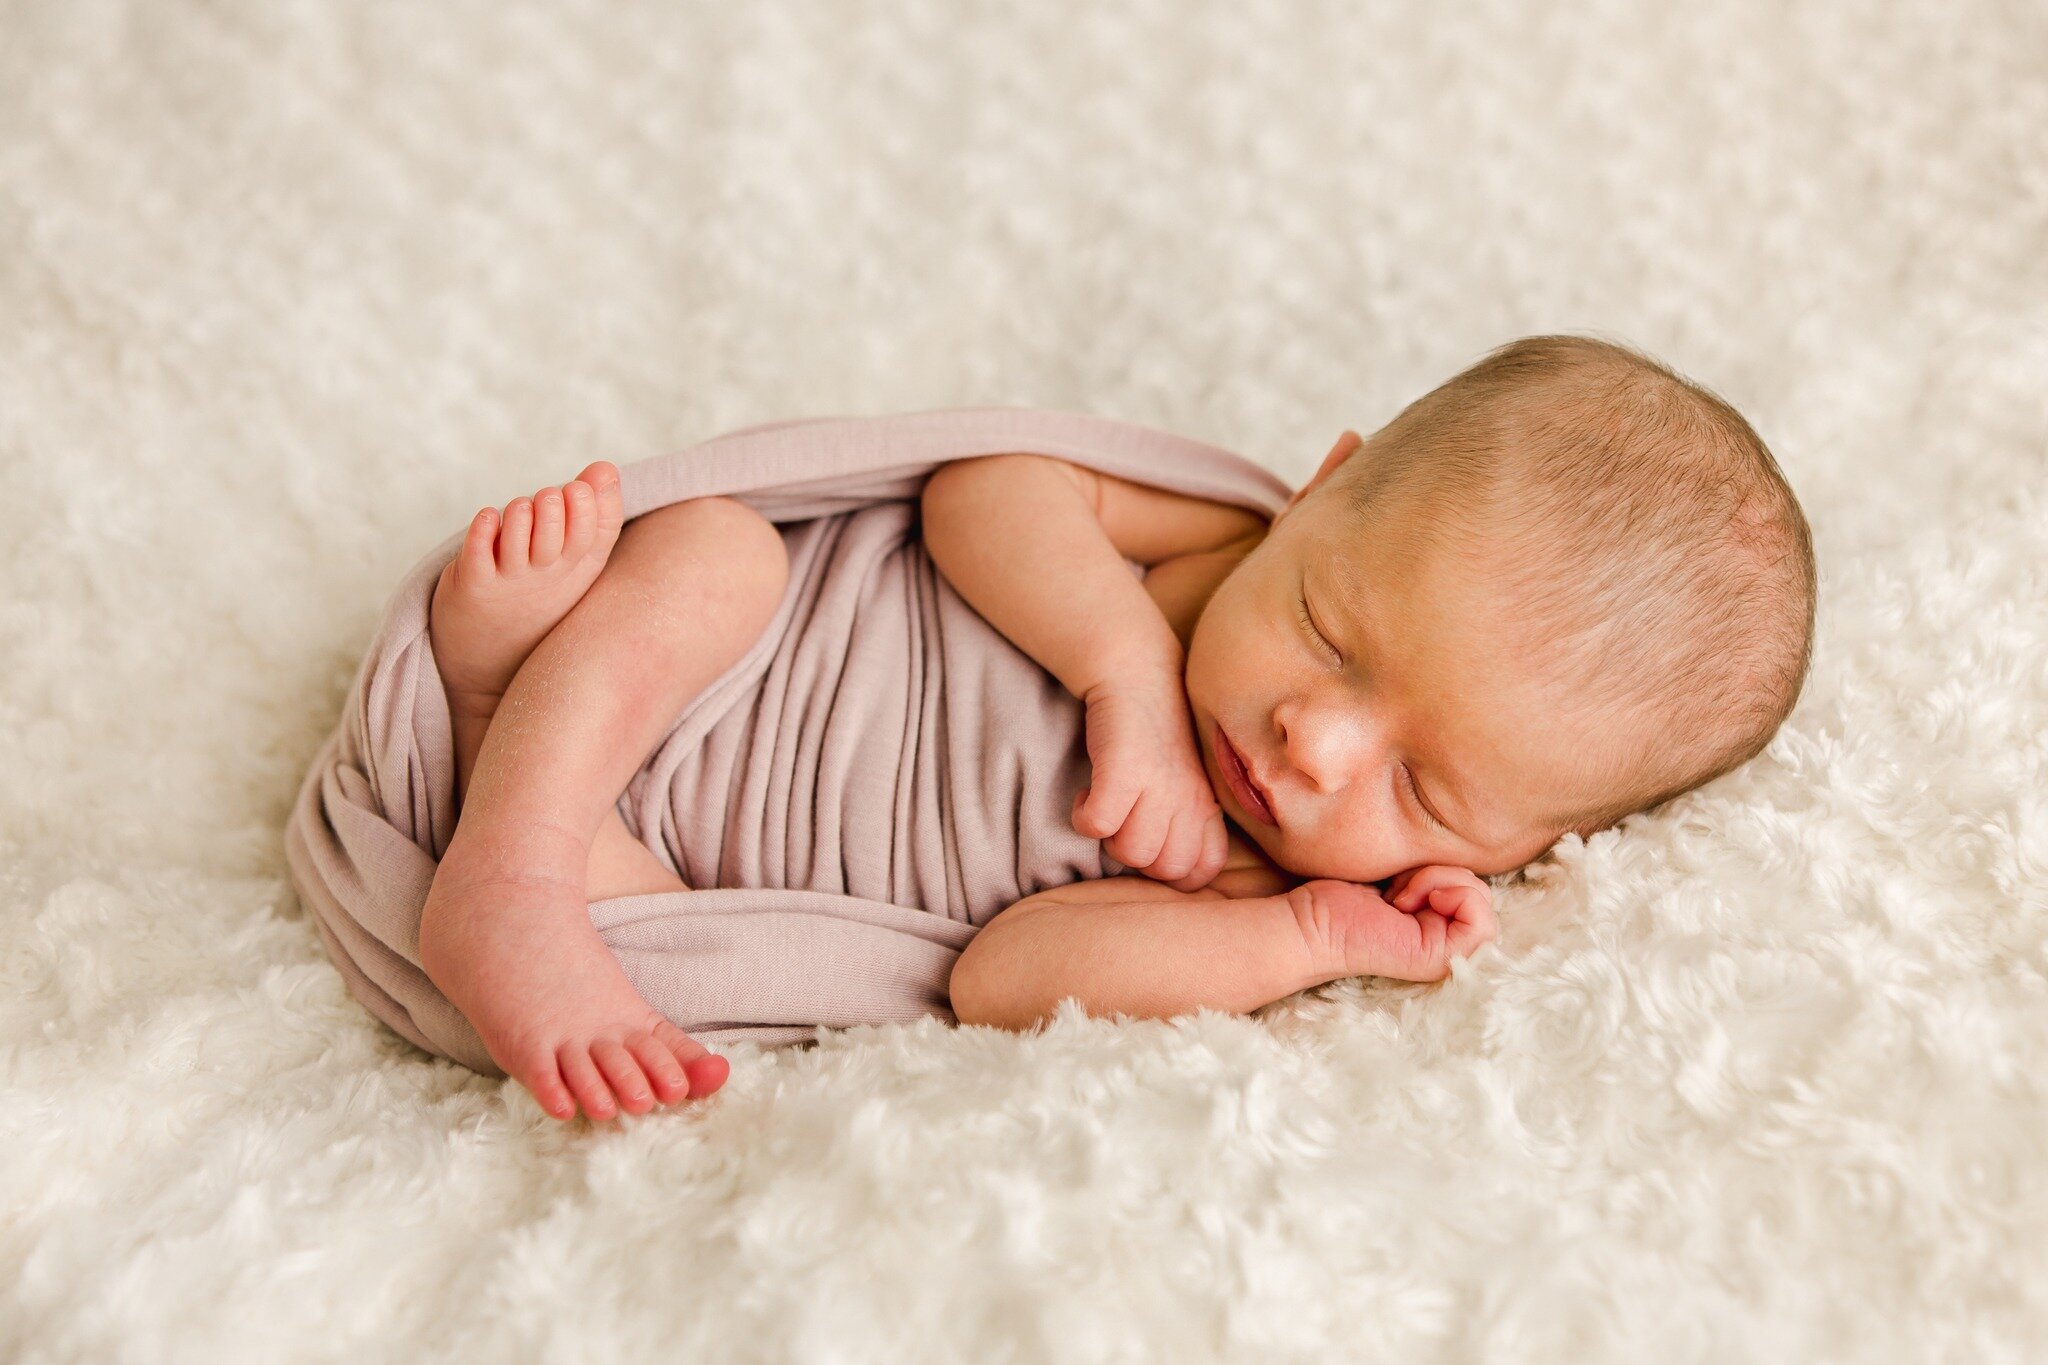 No two babies are alike, which means each newborn session is unique. Some babies love to be fully swaddled, while others prefer to have their arms and legs free. Some babies sleep and others don't want to miss a moment of the experience. My newborn s